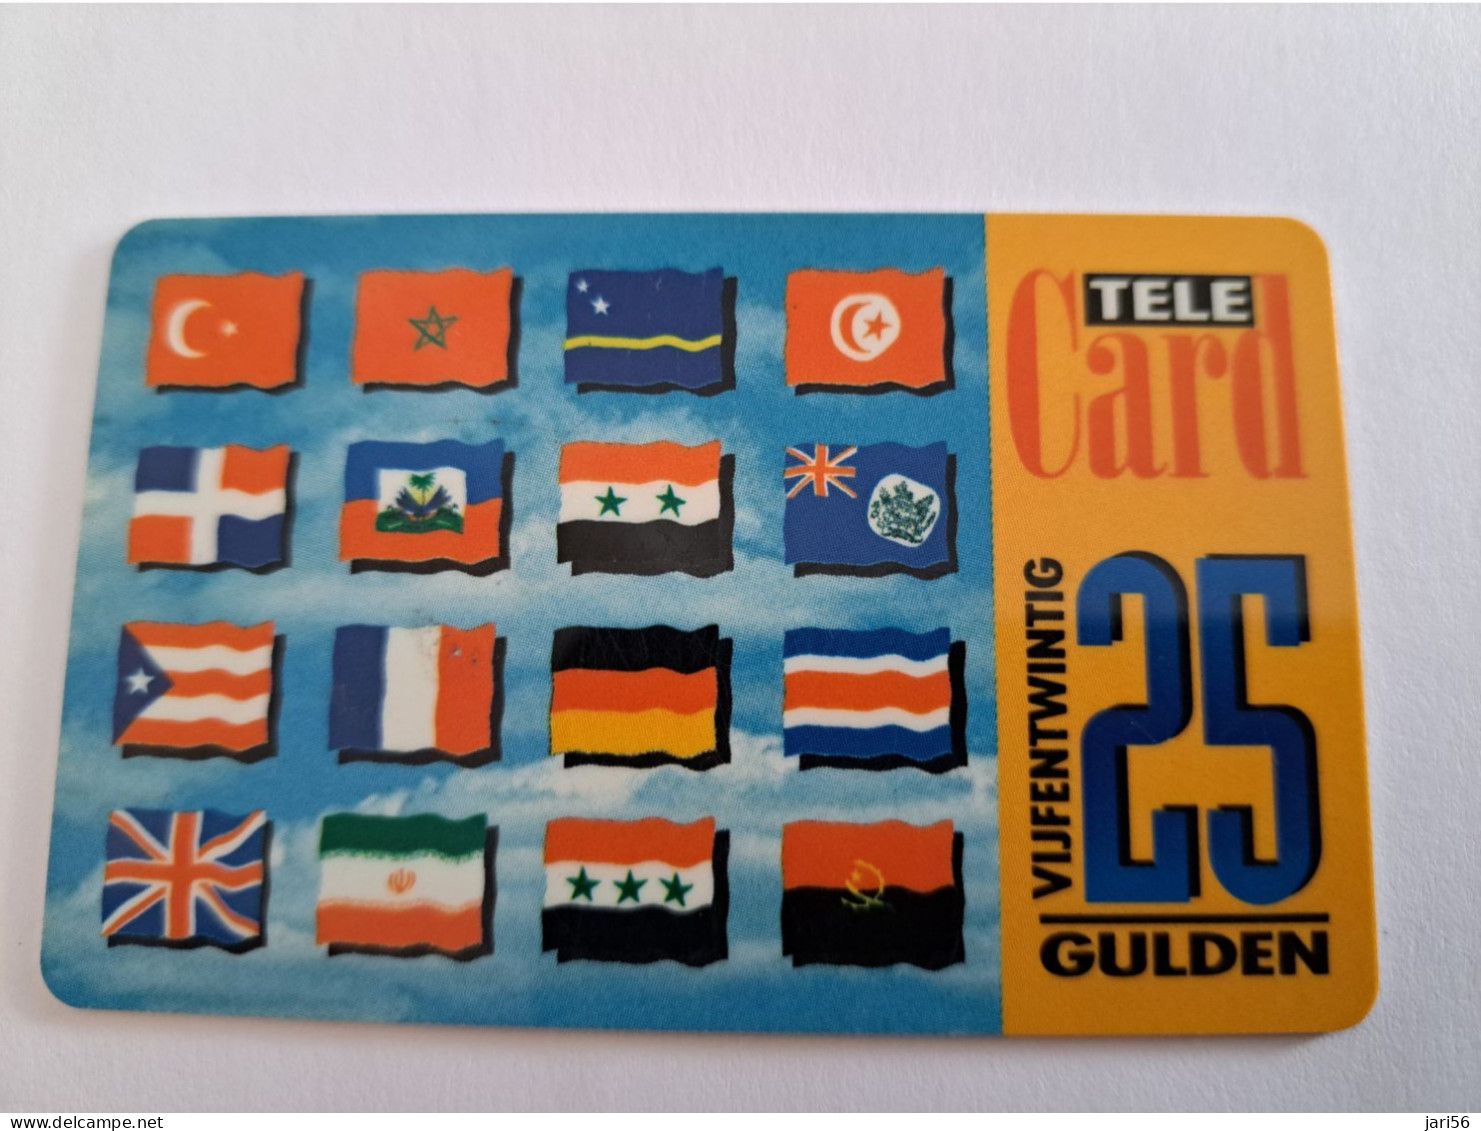 NETHERLANDS/ PREPAID/  HFL 25,- ,- /FLAGS OF THE DIFFERENT COUNTRYS/   - USED CARD  ** 13942** - Cartes GSM, Prépayées Et Recharges